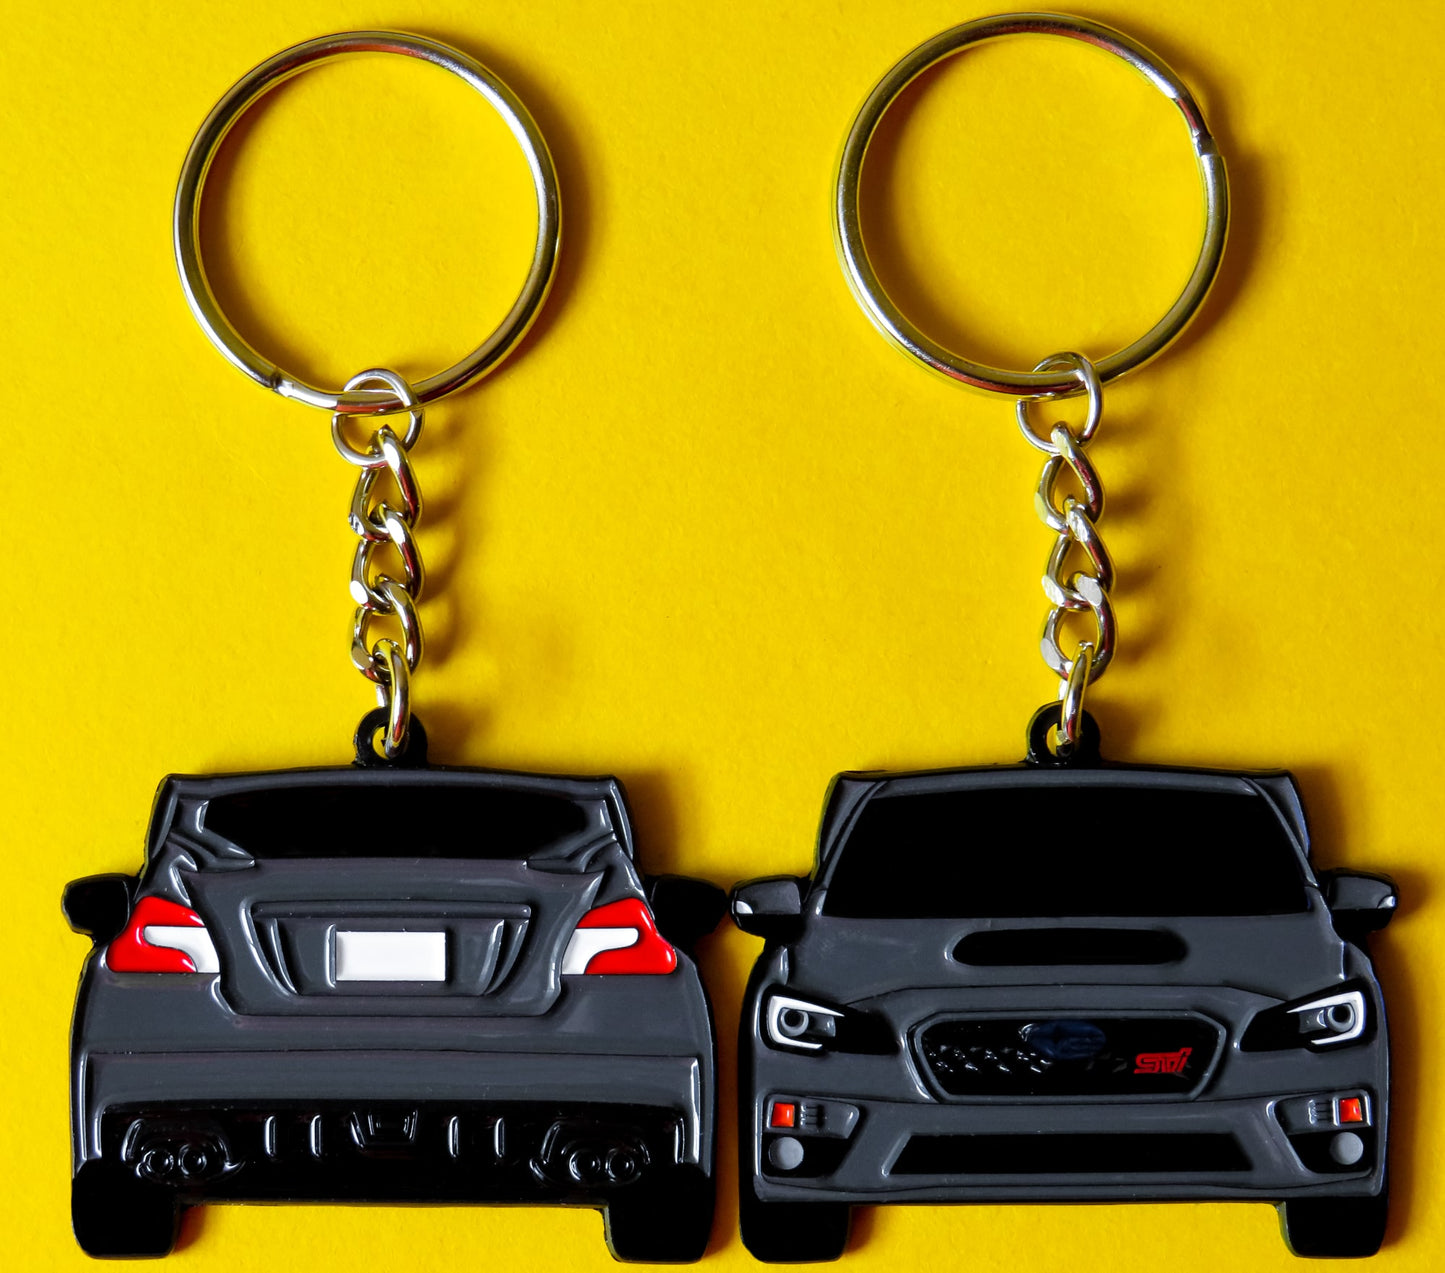 Gray Subaru WRX STI 2-Sided Keychain that fits on a key fob, Precision-Crafted Design, Ideal for WRX STI Enthusiasts, Rally Car Lovers, and Automotive Fans. Elevate Your Keys with WRX STI Style and Unmatched Performance, A Must-Have Accessory for Subaru WRX STI Owners. A great gift for owners, fans, him, her, boyfriend, girlfriend, mom, dad, father, mother, and more!